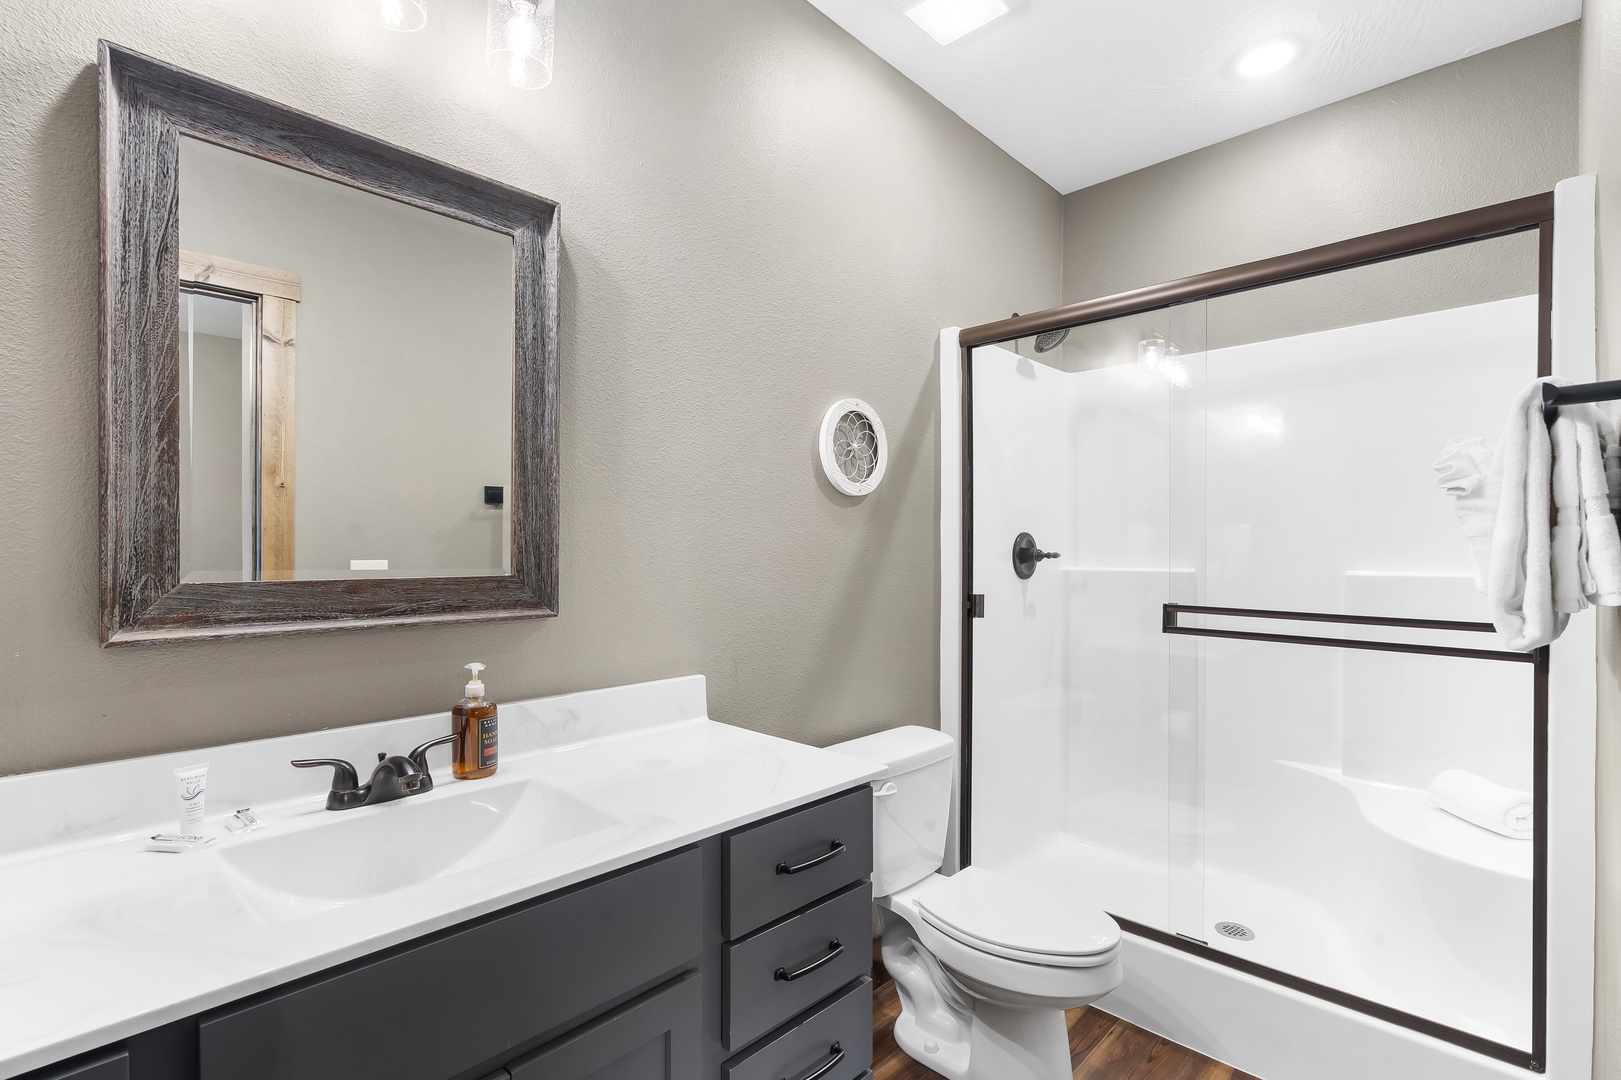 The fourth bedroom’s ensuite features a single vanity & shower/tub combo